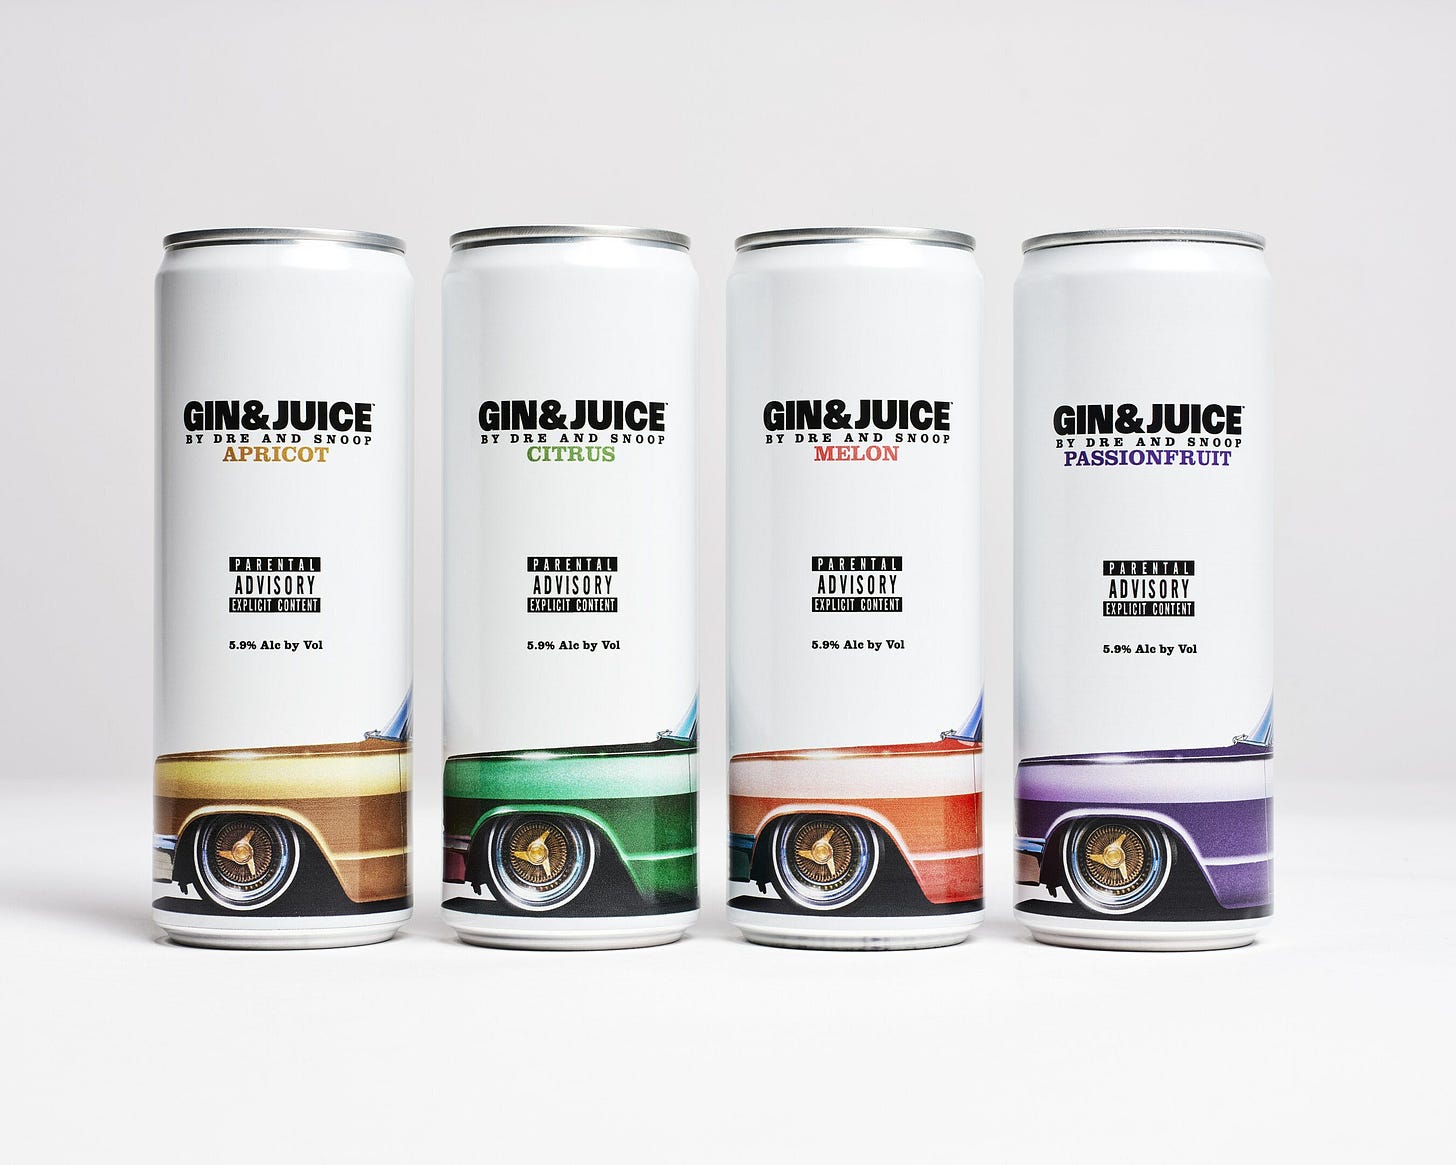 Gin and Juice', pre-mixed drink from Snoop and Dre, released to public